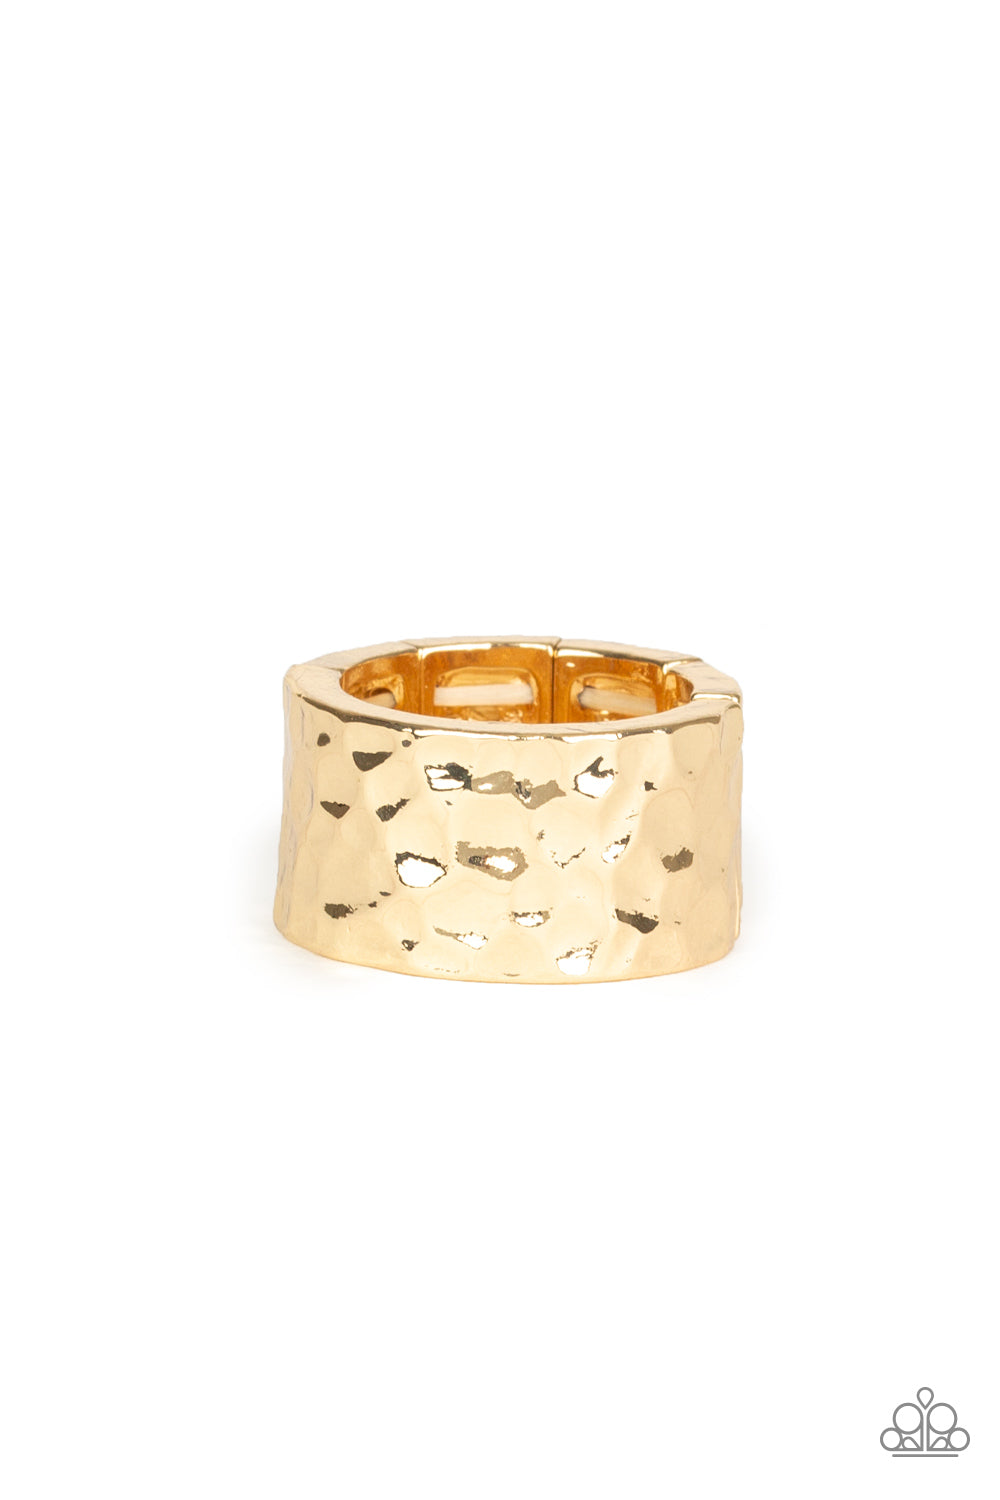 Self-Made Man Gold Paparazzi Ring Cashmere Pink Jewels - Cashmere Pink Jewels & Accessories, Cashmere Pink Jewels & Accessories - Paparazzi